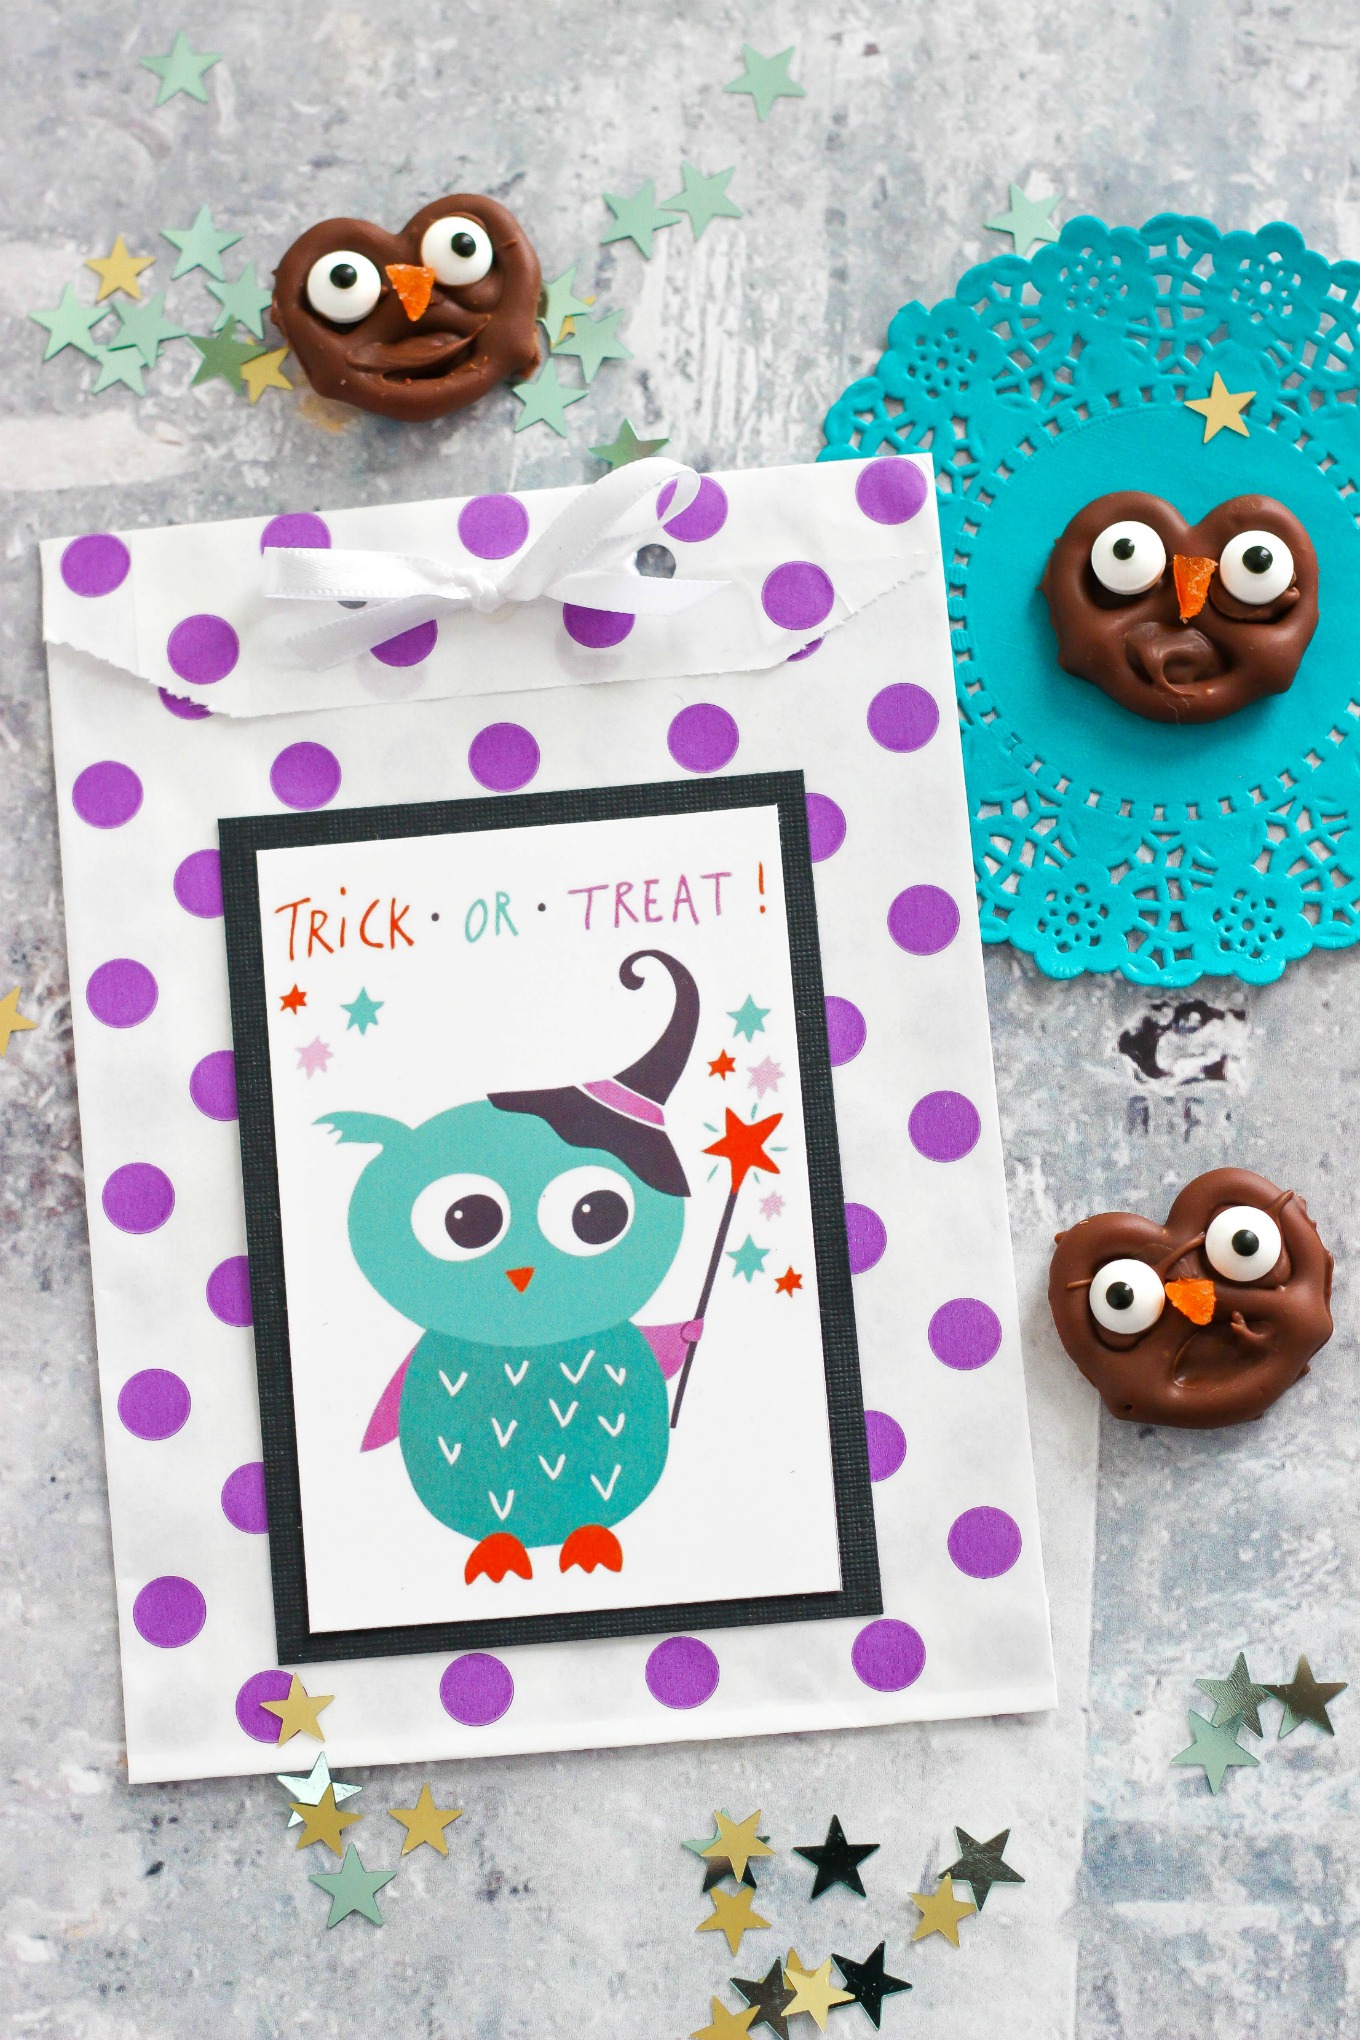 Chocolate Covered Owl Pretzels with Halloween Printables